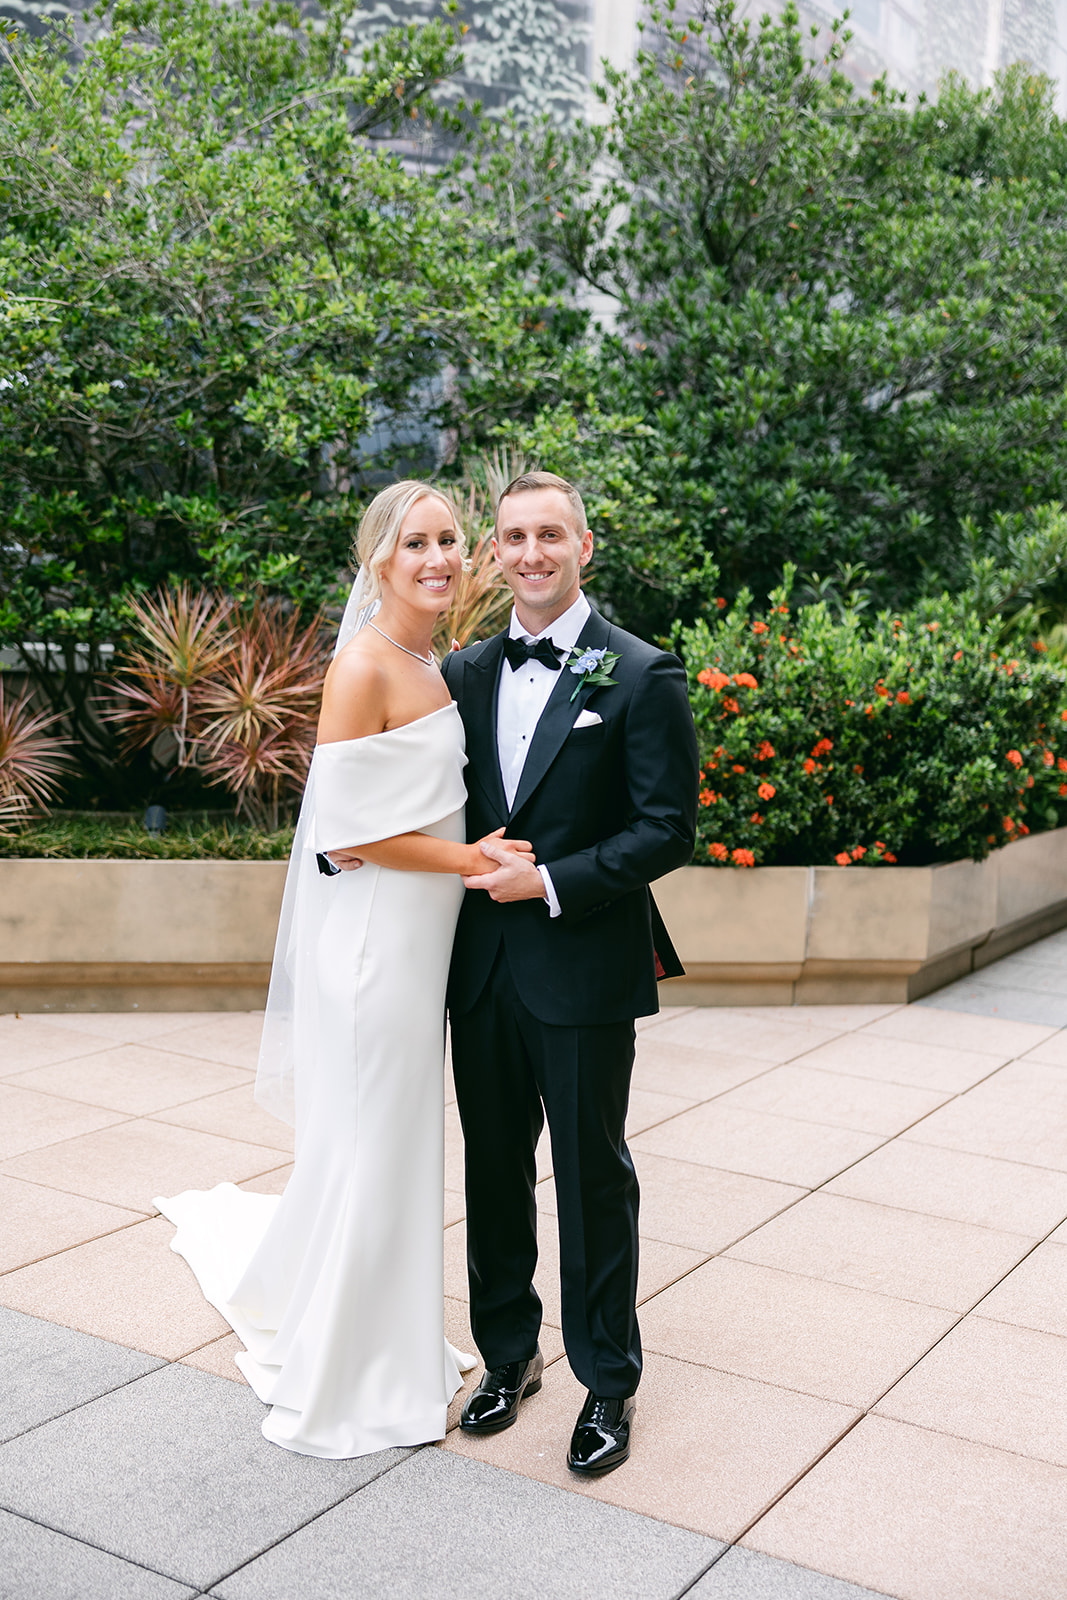 how to pose bride and groom traditional wedding day portrait. high end elopement wedding in tampa florida. sarah bradshaw photography.